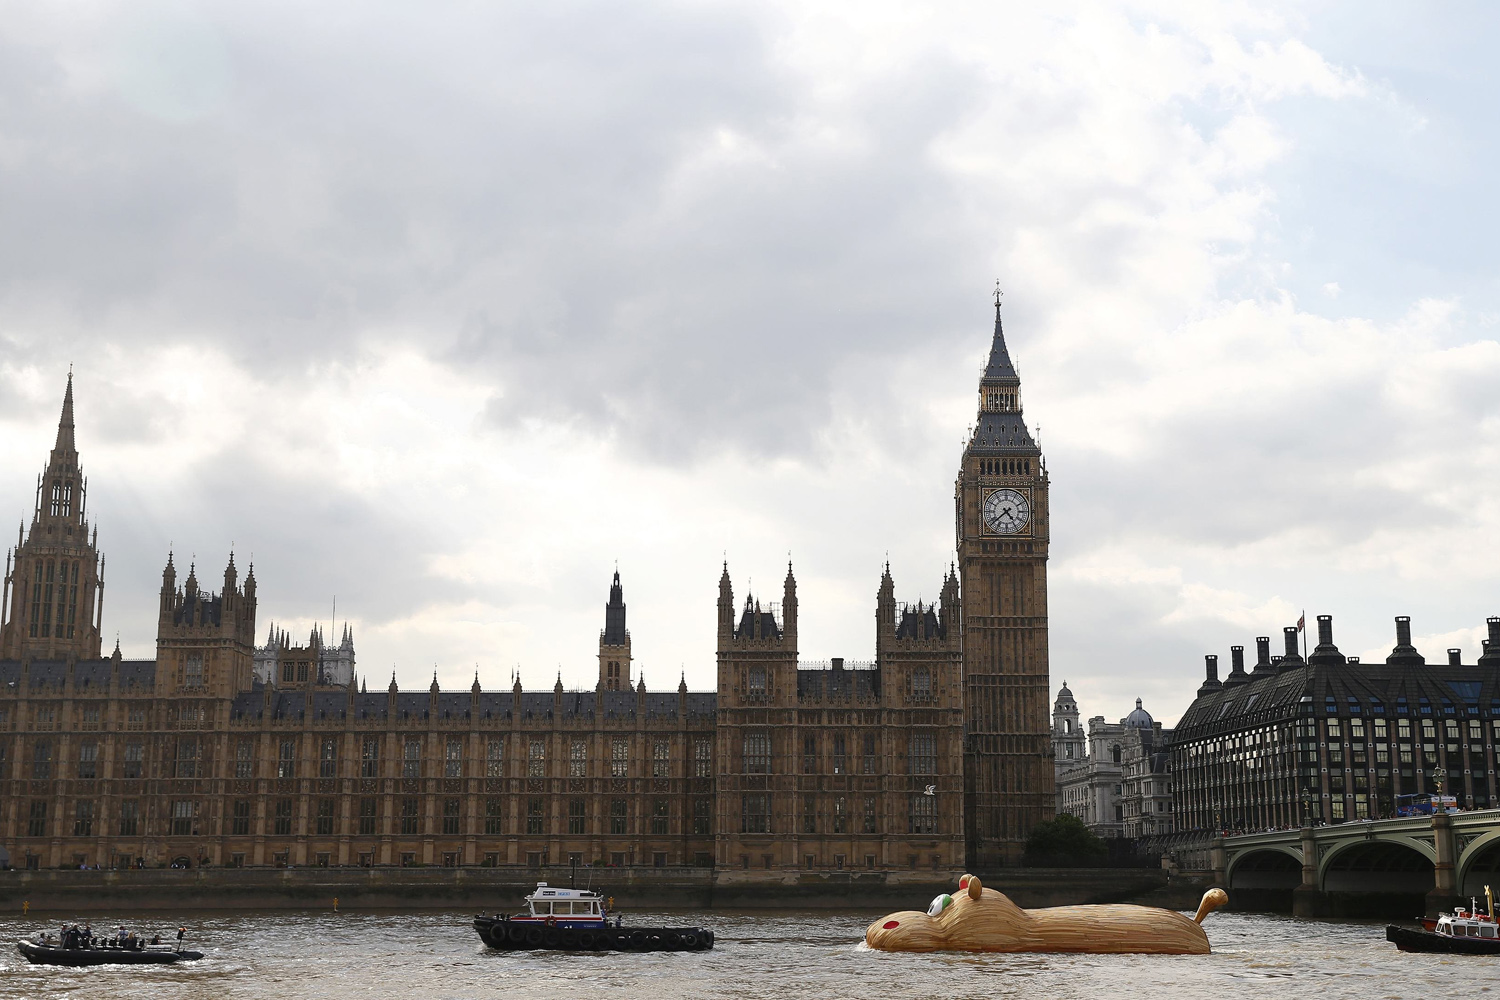 A sculpture of a giant hippopotamus built by artist Florentjin Hofman is towed up the Thames past the Houses of Parliament in central London